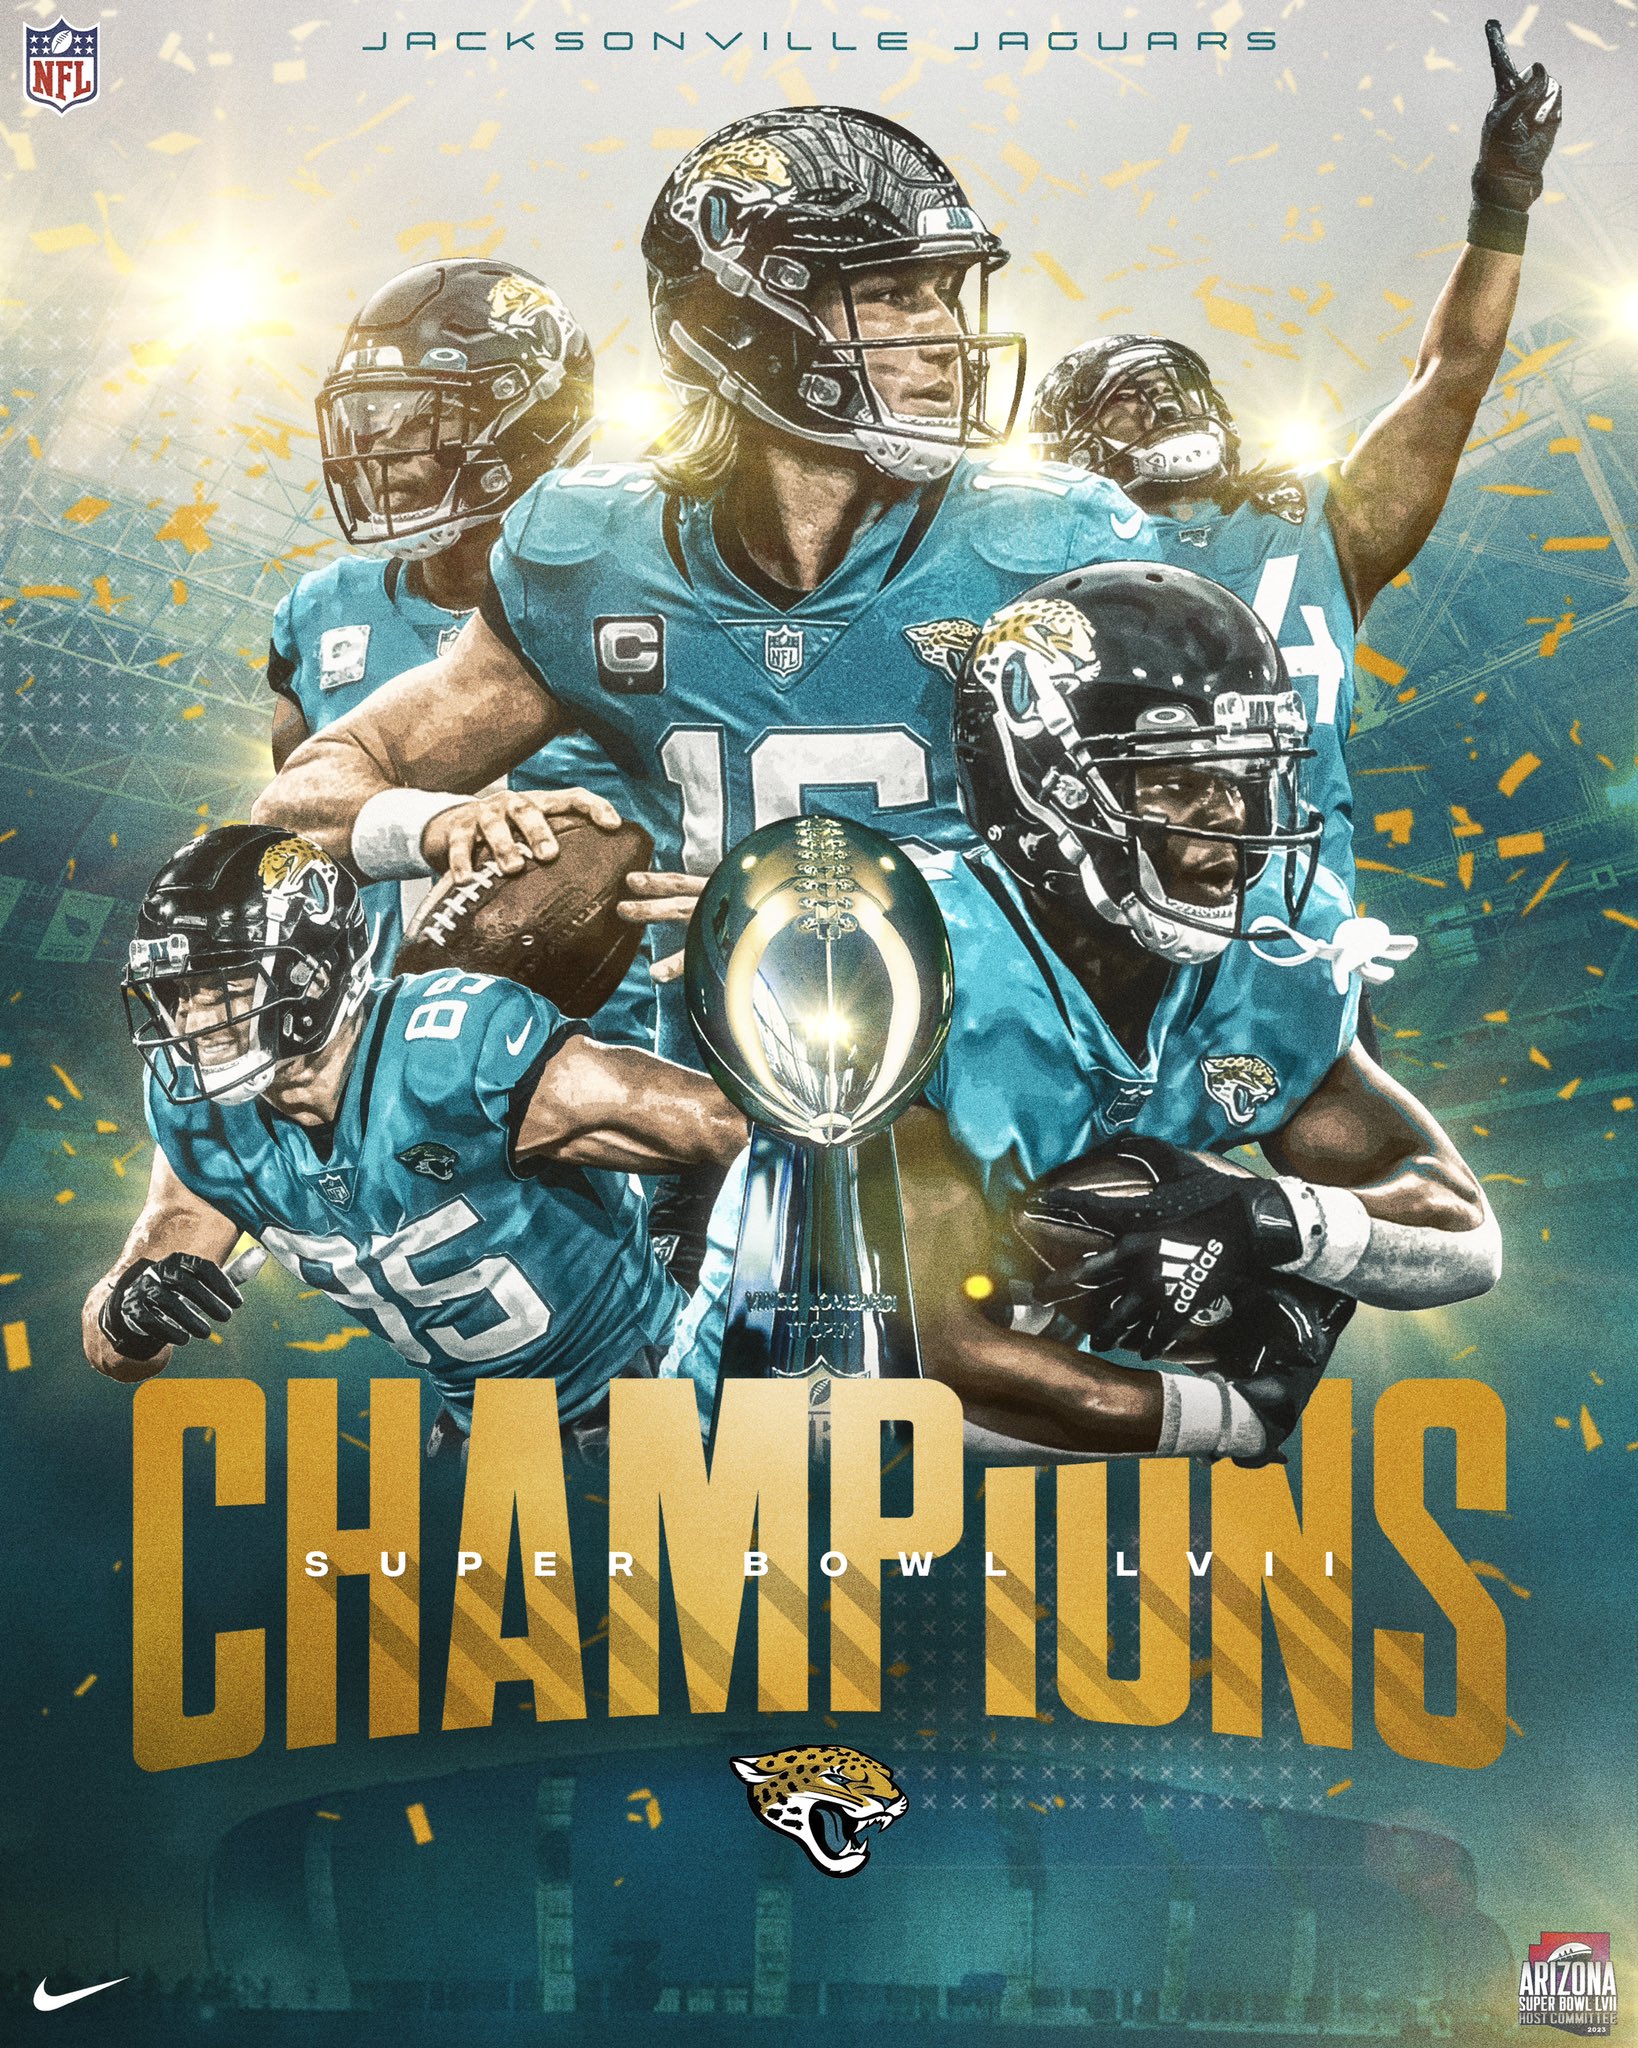 Josh Mindemann on X: 'We had our first challenge in the Sports Creative  group chat I'm in and the prompt was a championship graphic for the Jacksonville  Jaguars as if they won